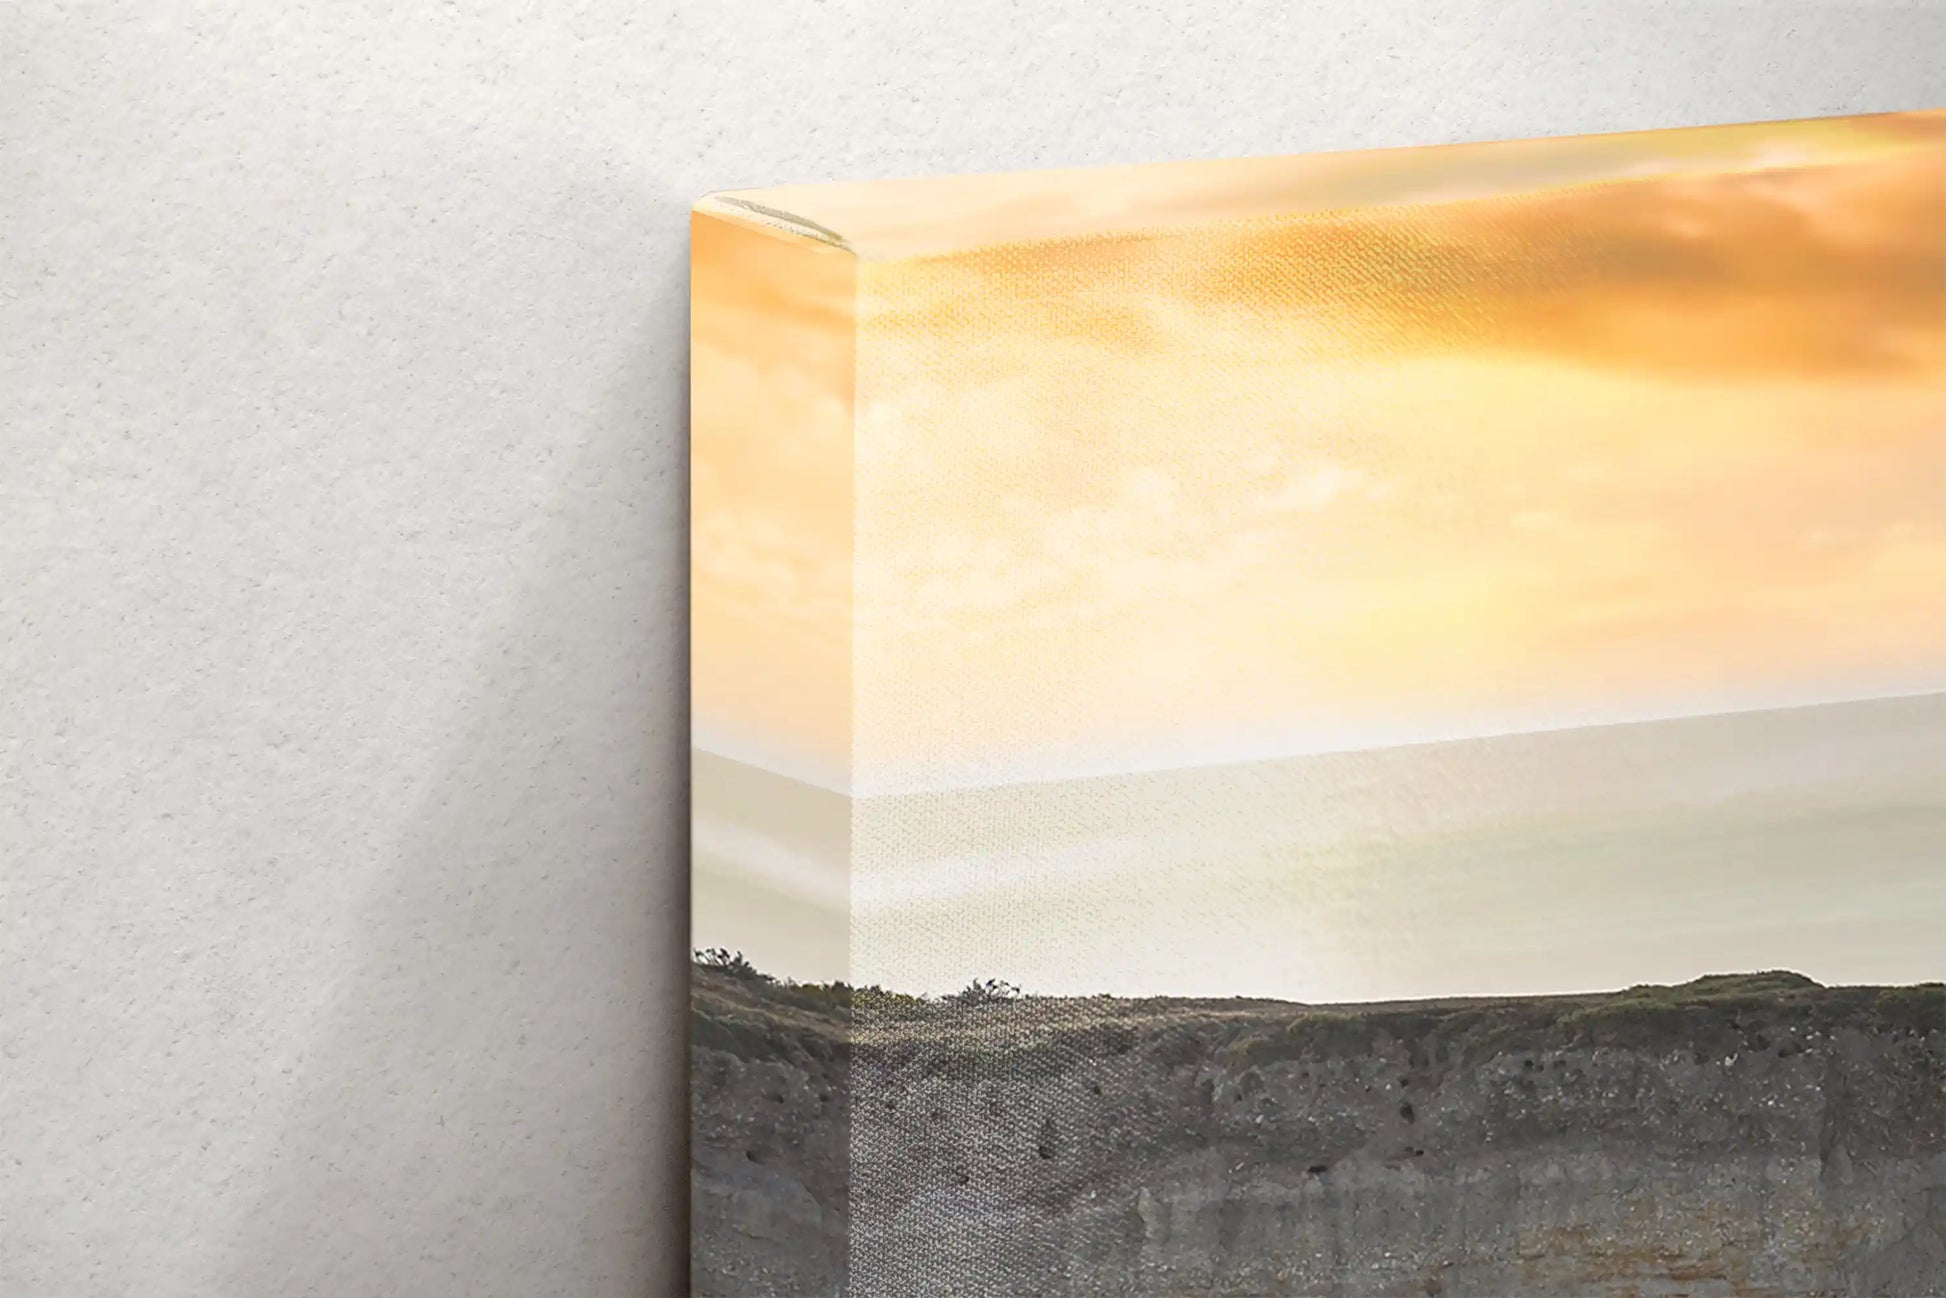 Detail of a canvas edge with a golden sky over the California Pacific cliffs at dusk, highlighting the seamless gallery wrap finish.